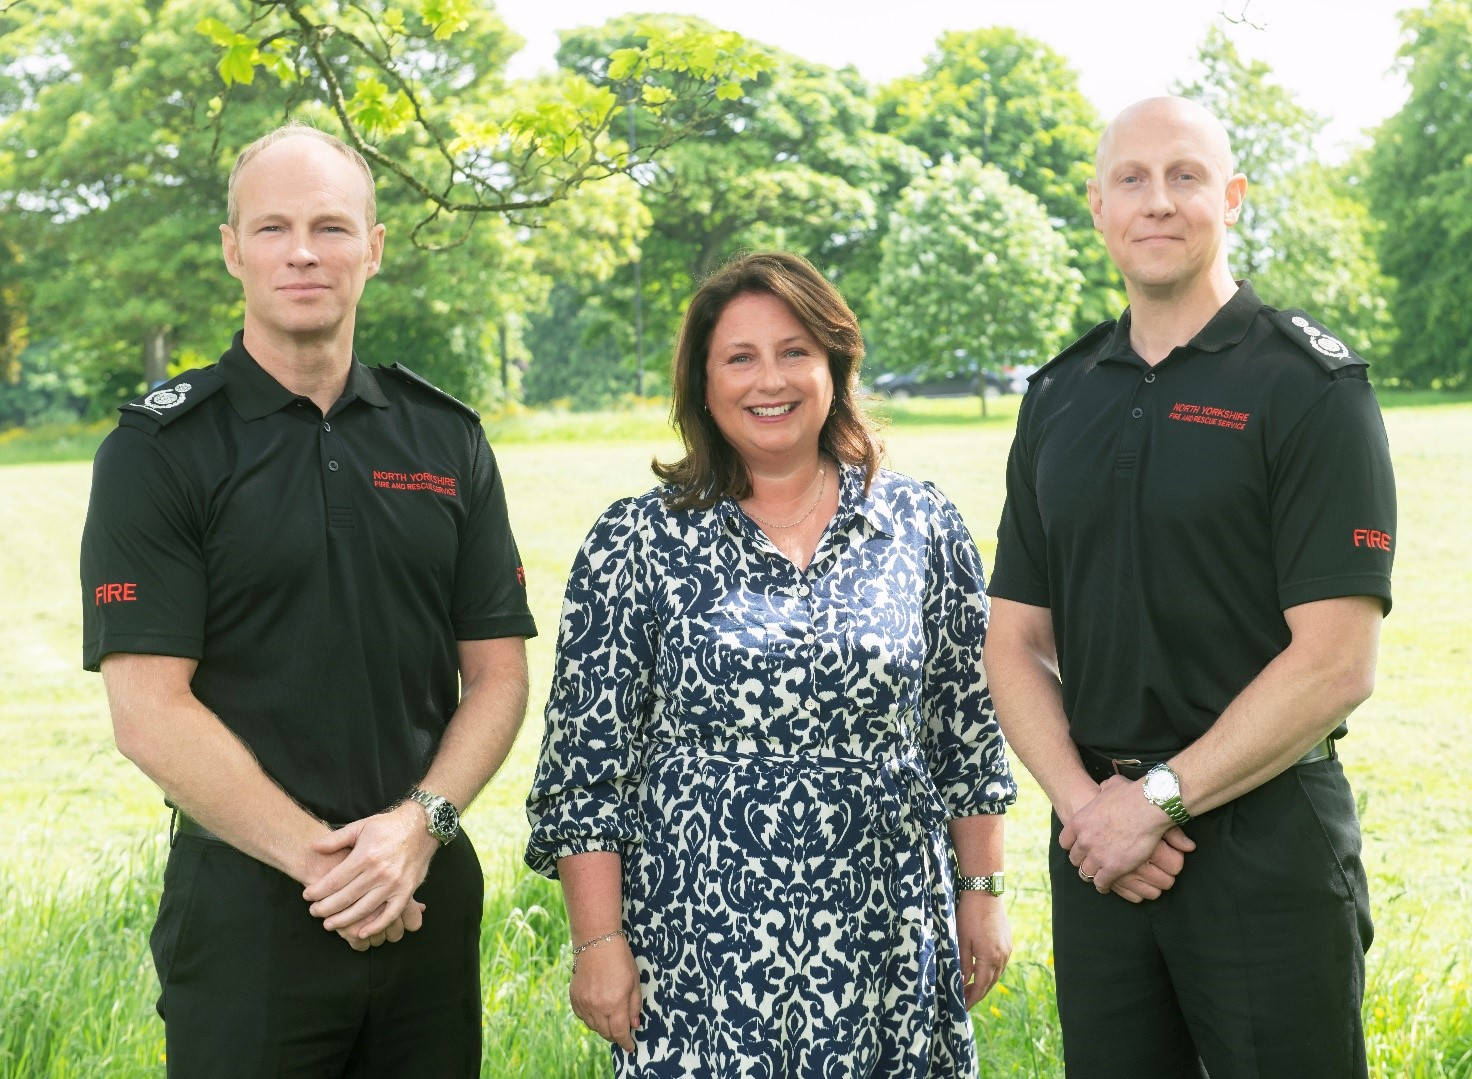 From left to Right: Deputy Chief Fire Officer Mat Walker, Commissioner Zoë, and Chief Fire Officer Jonathan Dyson outside the OPFCC at Granby Road, Harrogate